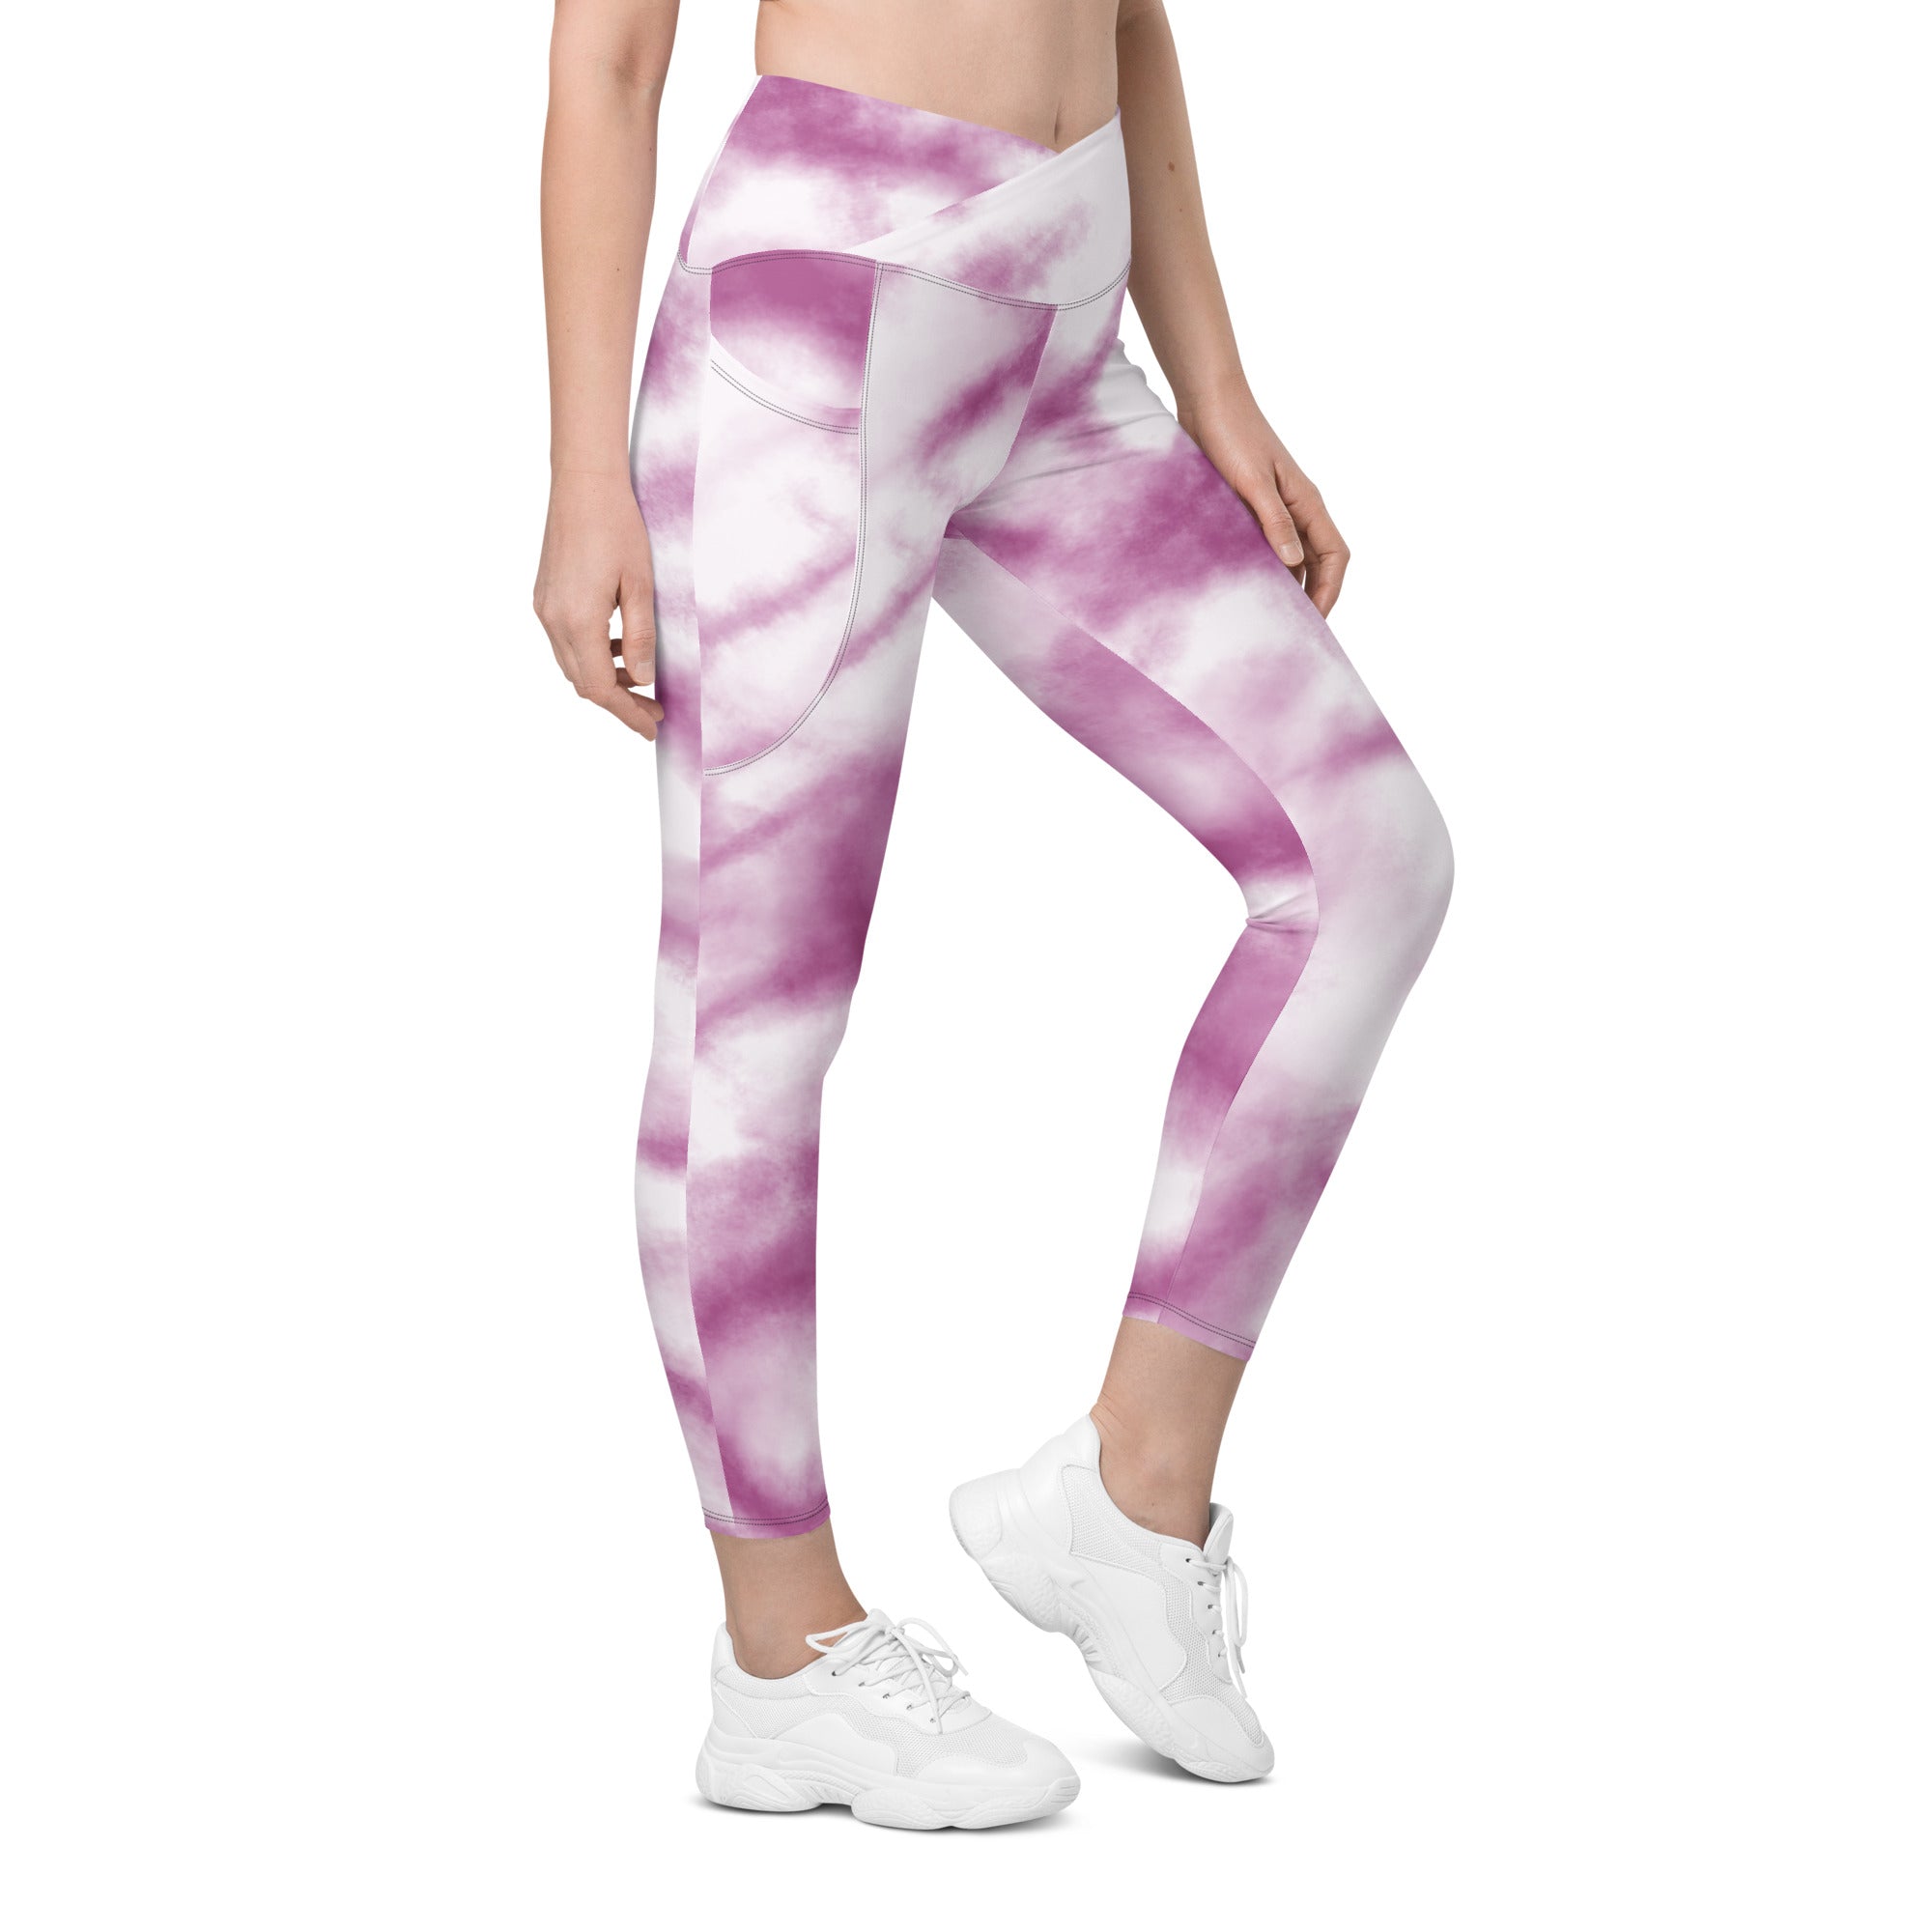 Purple Tie Dye Women's Tights, Best Pink Purple Tie Dye Printed Women's Tights, Best Tie Dye Print Best Designer Printed Crossover UPF 50+ Sports Yoga Gym Leggings With 2 Side Pockets For Ladies - Made in USA/EU/MX (US Size: 2XS-6XL) Plus Size Available, Tie Dye Leggings, Tie Dye Women's Tights